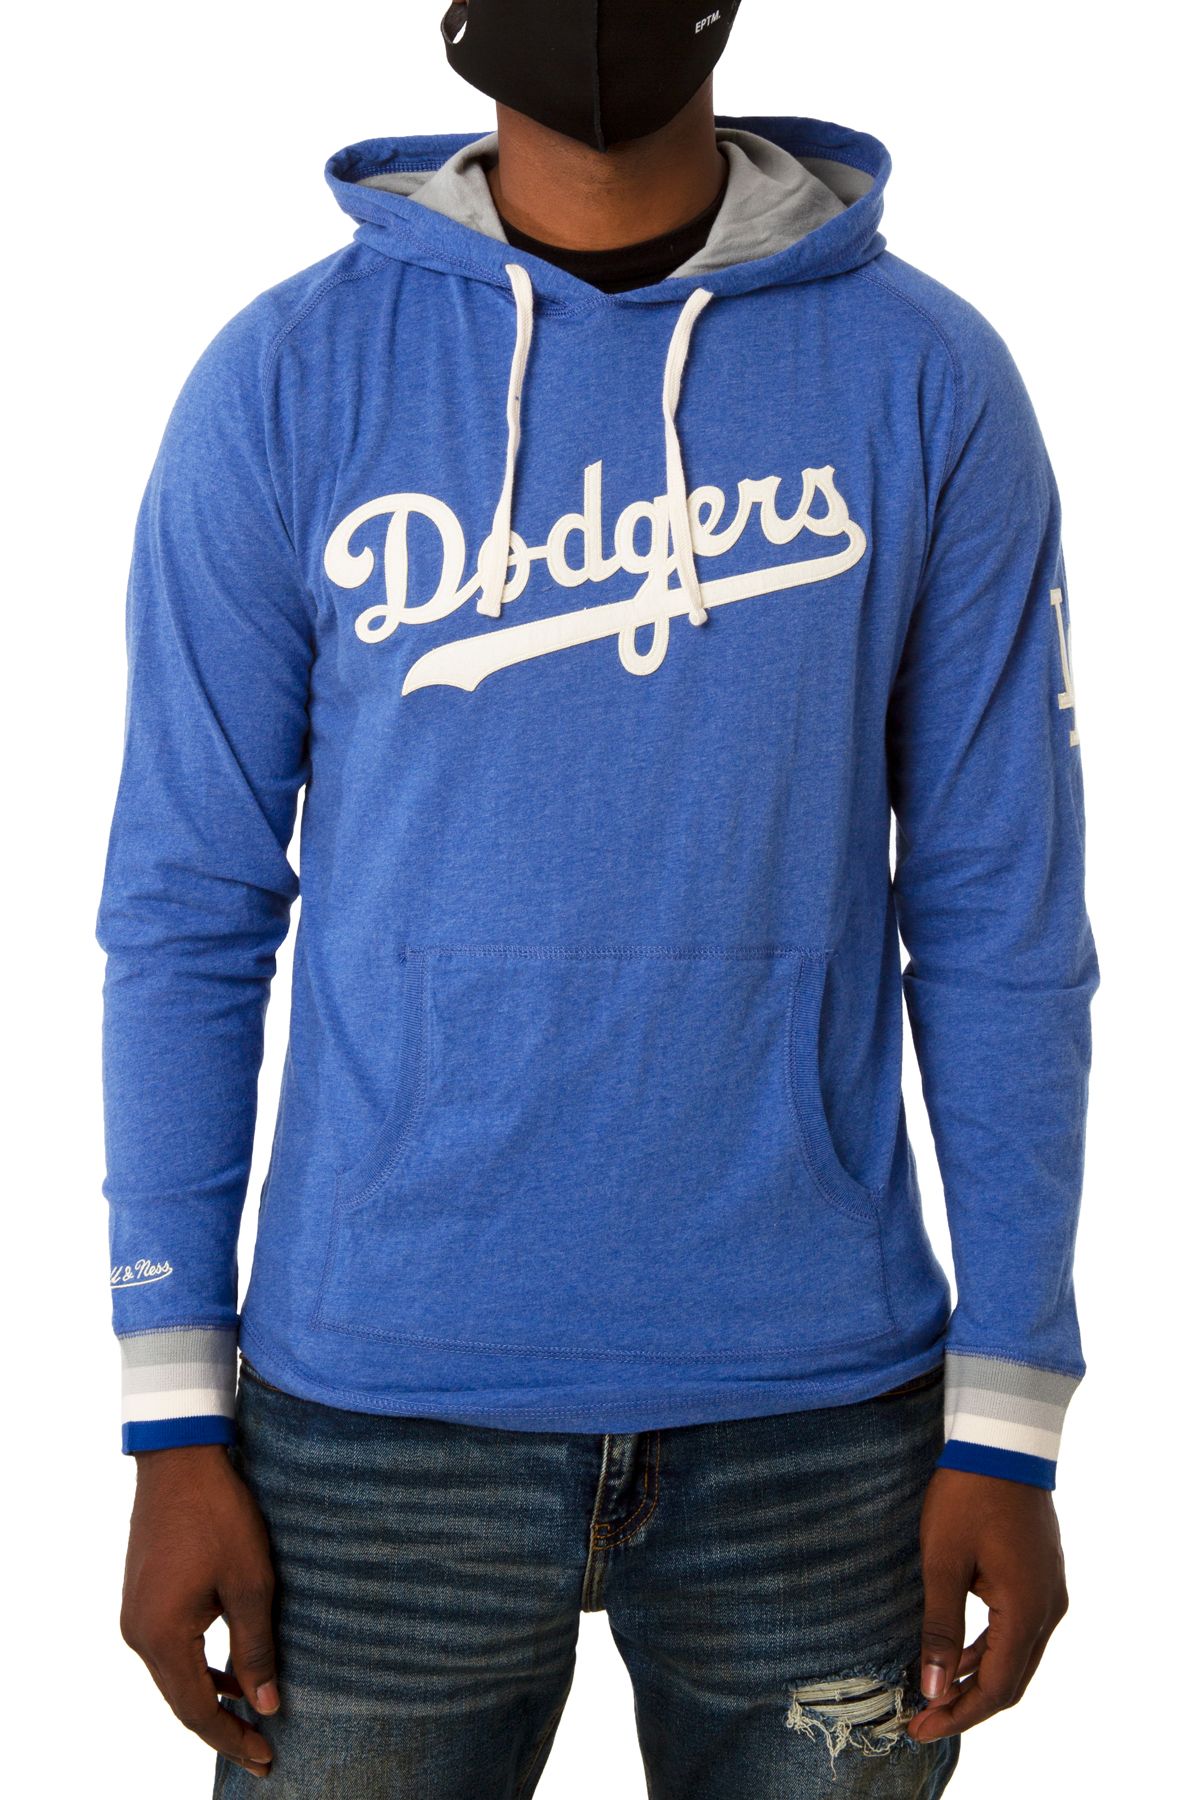 Los Angeles Dodgers on X: Looking good. Tonight's hooded sweatshirts  presented by Bank of America!  / X